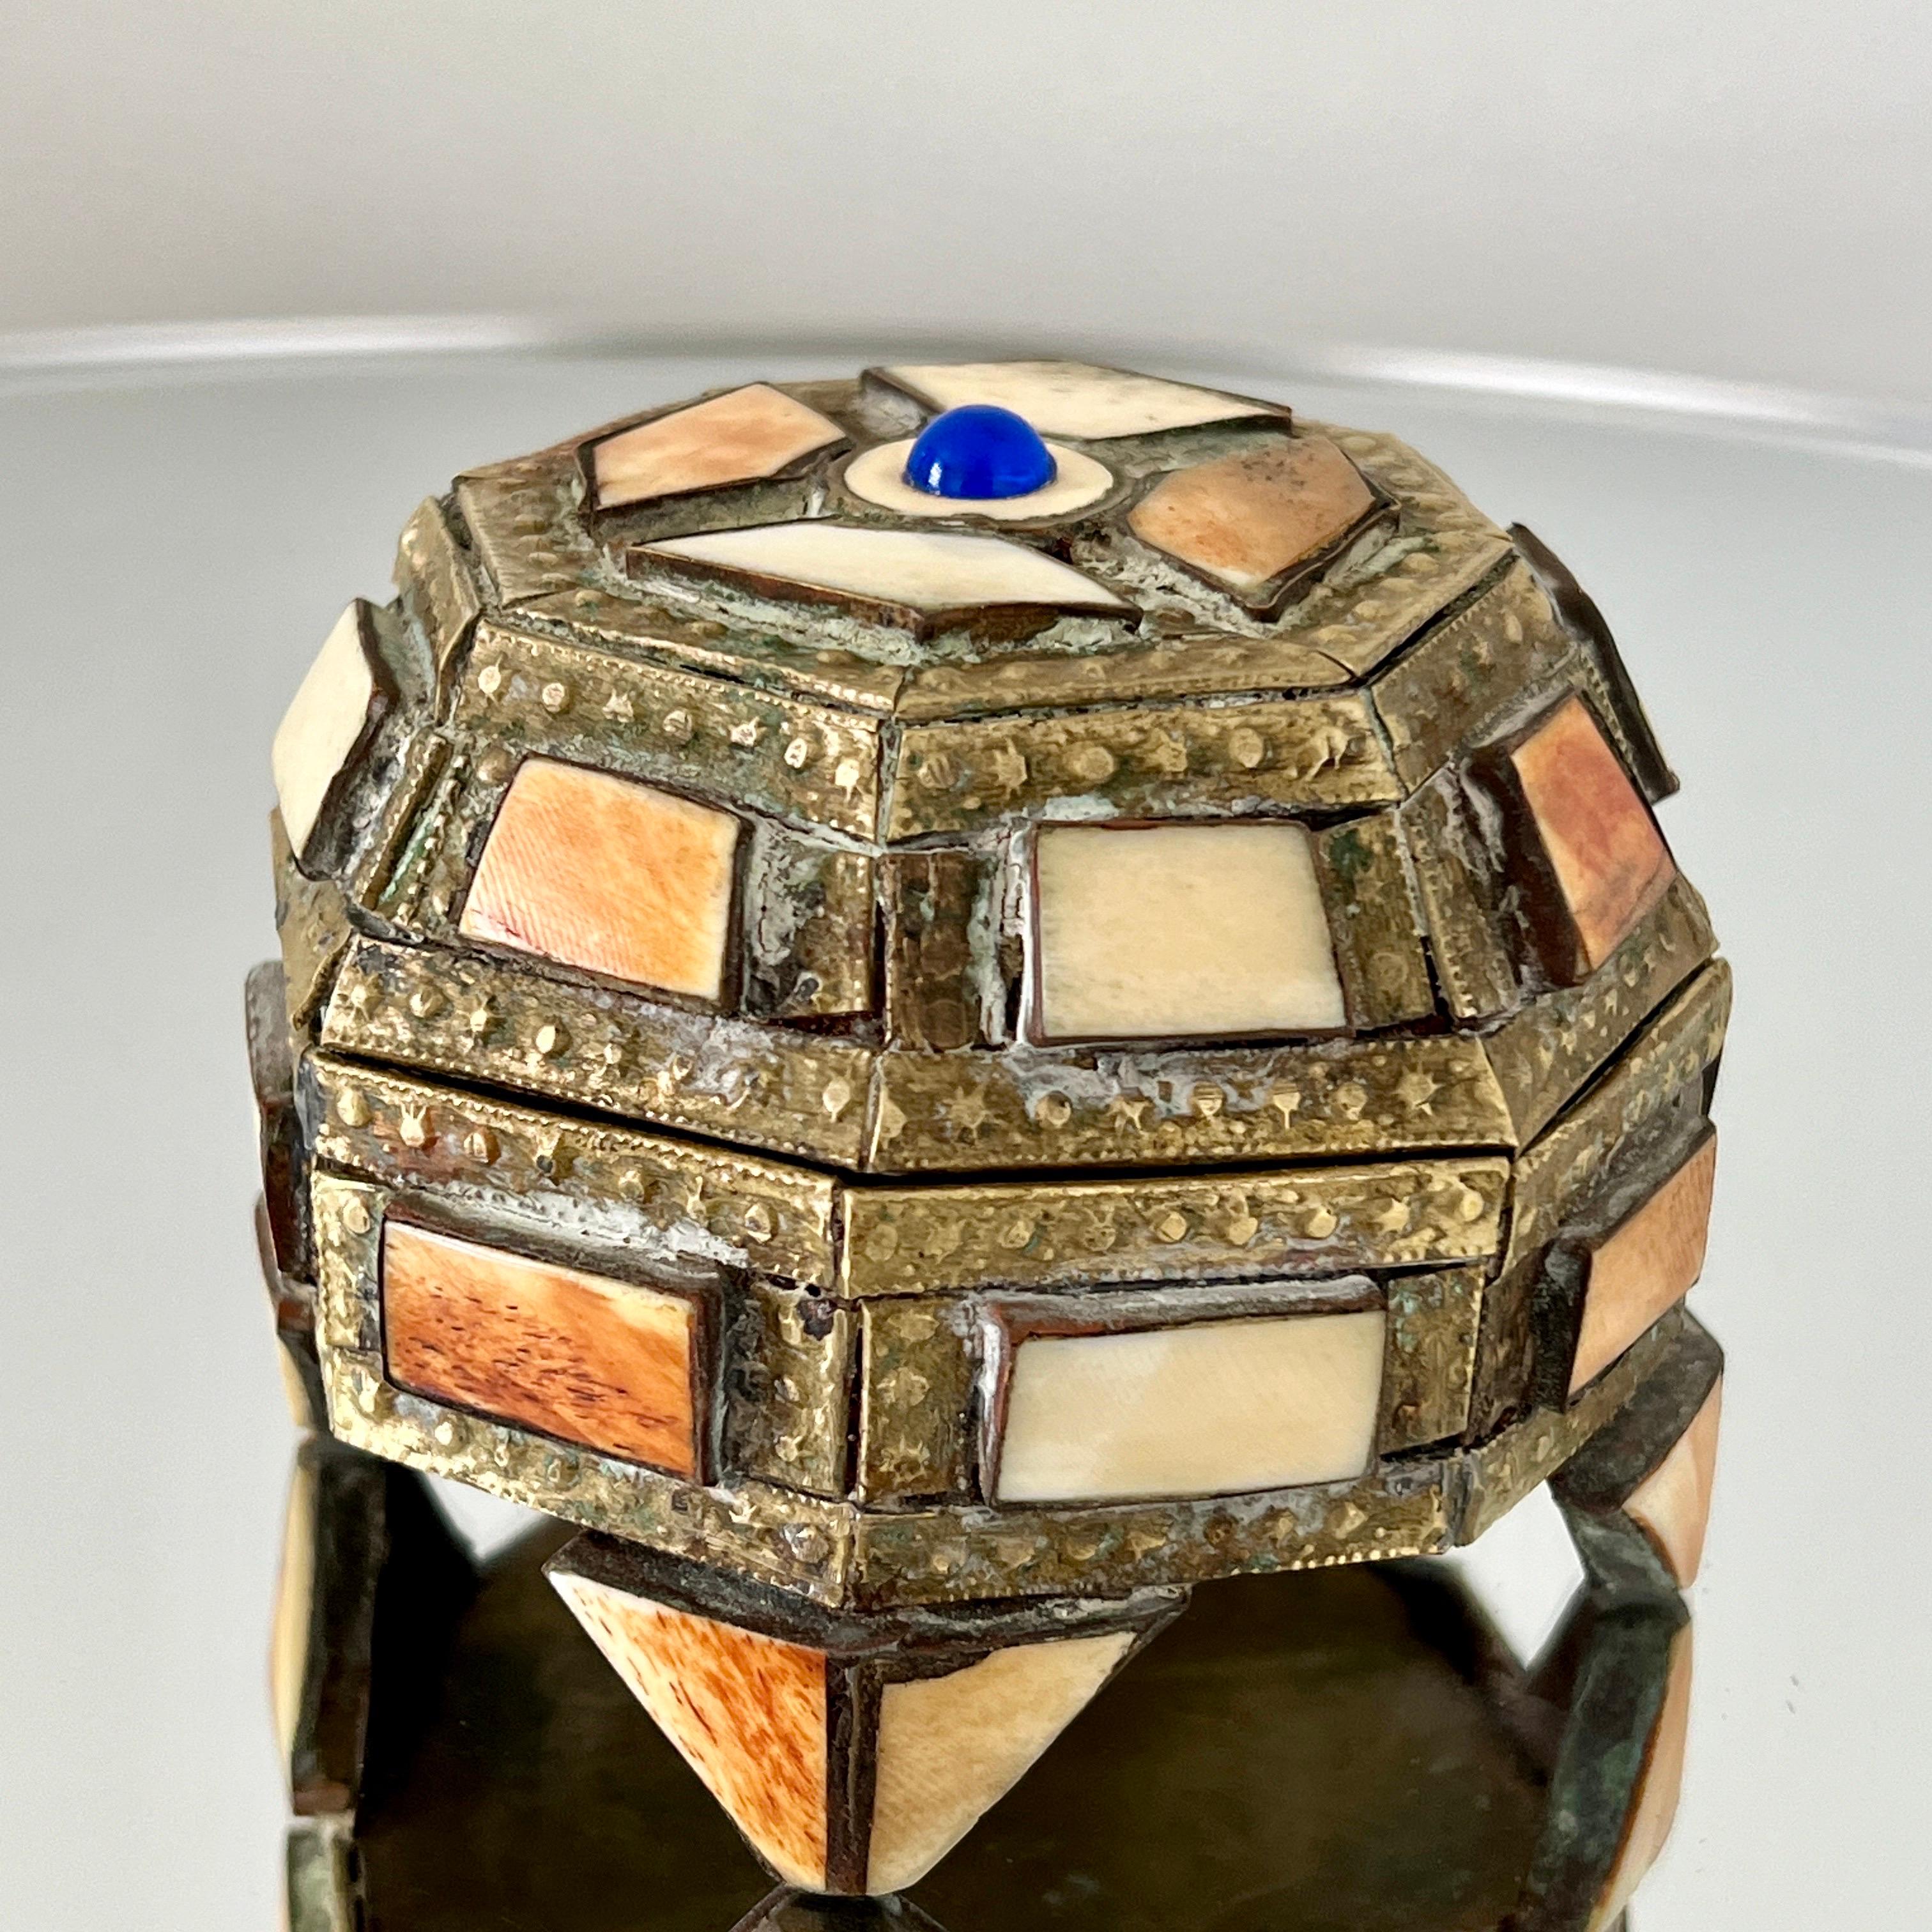 Handmade mosaic trinket box in beaded brass metal over wood with bone inlays.  The box has a geometrical octagon design with a footed base and lidded top.  It features incised metal motifs and a central semi-precious stone in blue.  The interior is